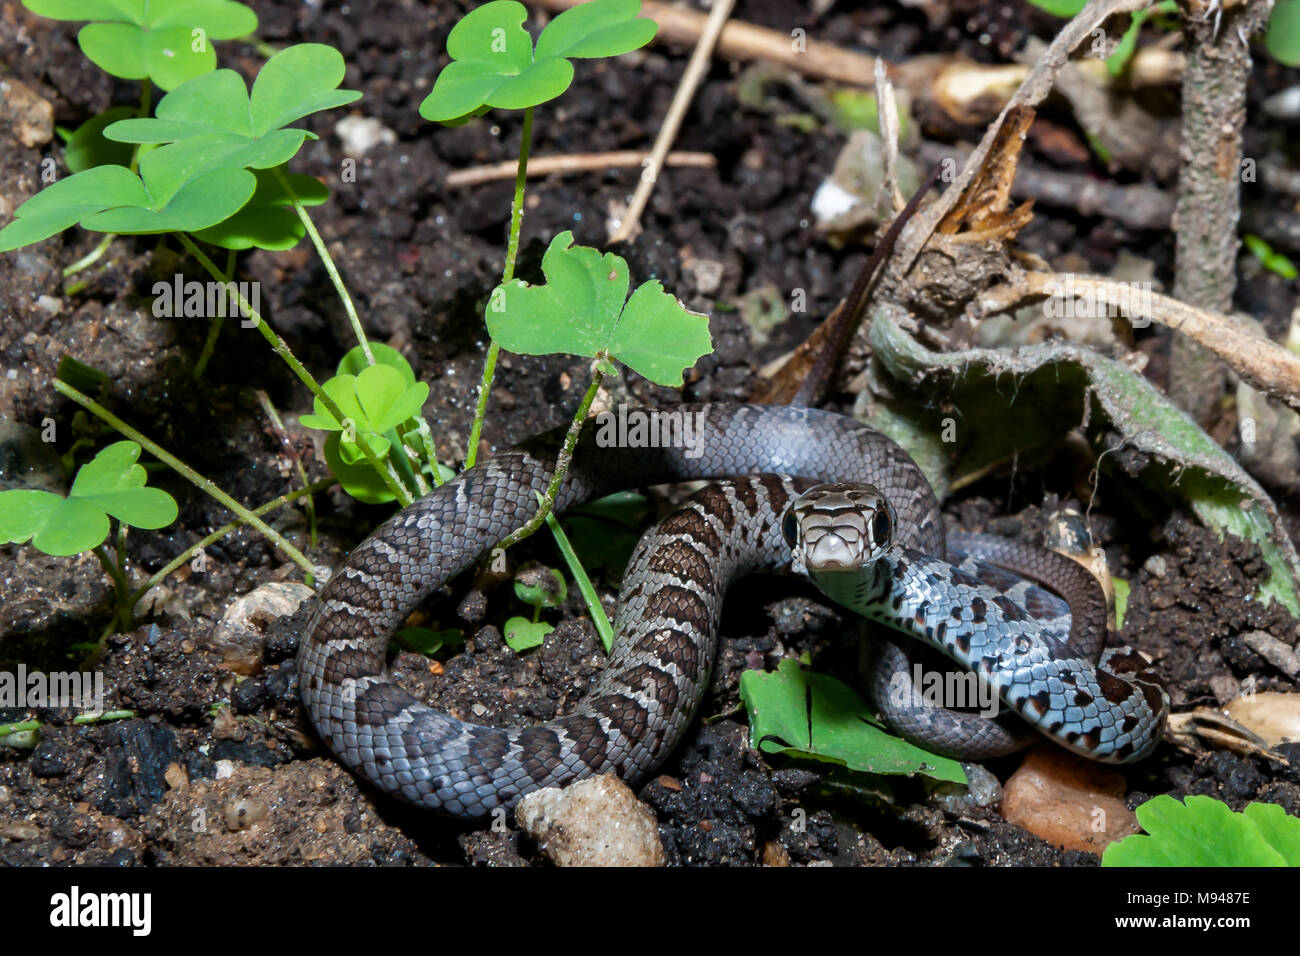 Juvenile Northern Black Racer (Coluber constrictor constrictor) Stock Photo